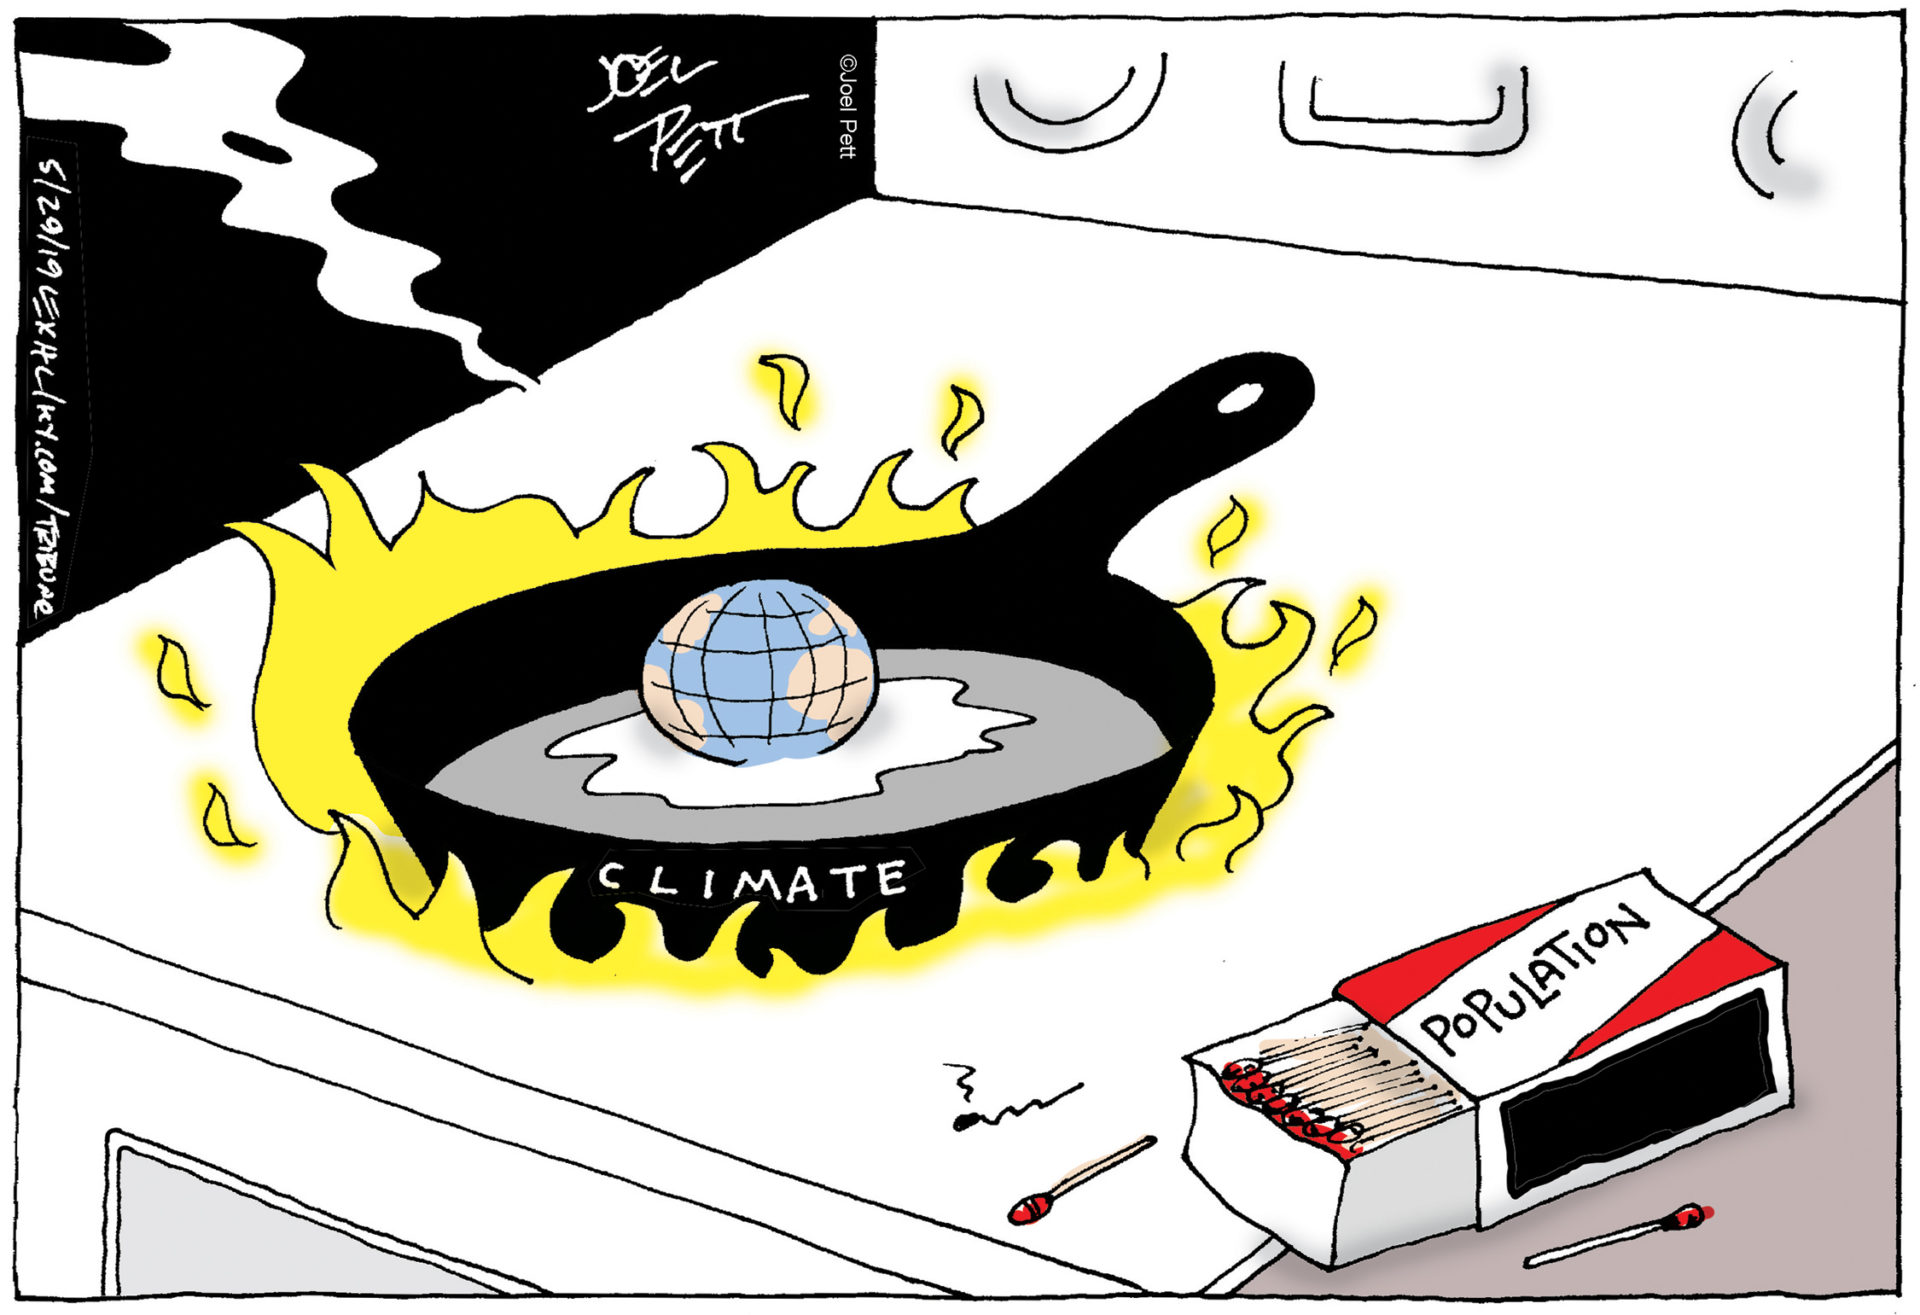 political cartoon done by joel pett showing earth melt in a climate skillet over a fire started by population matches.